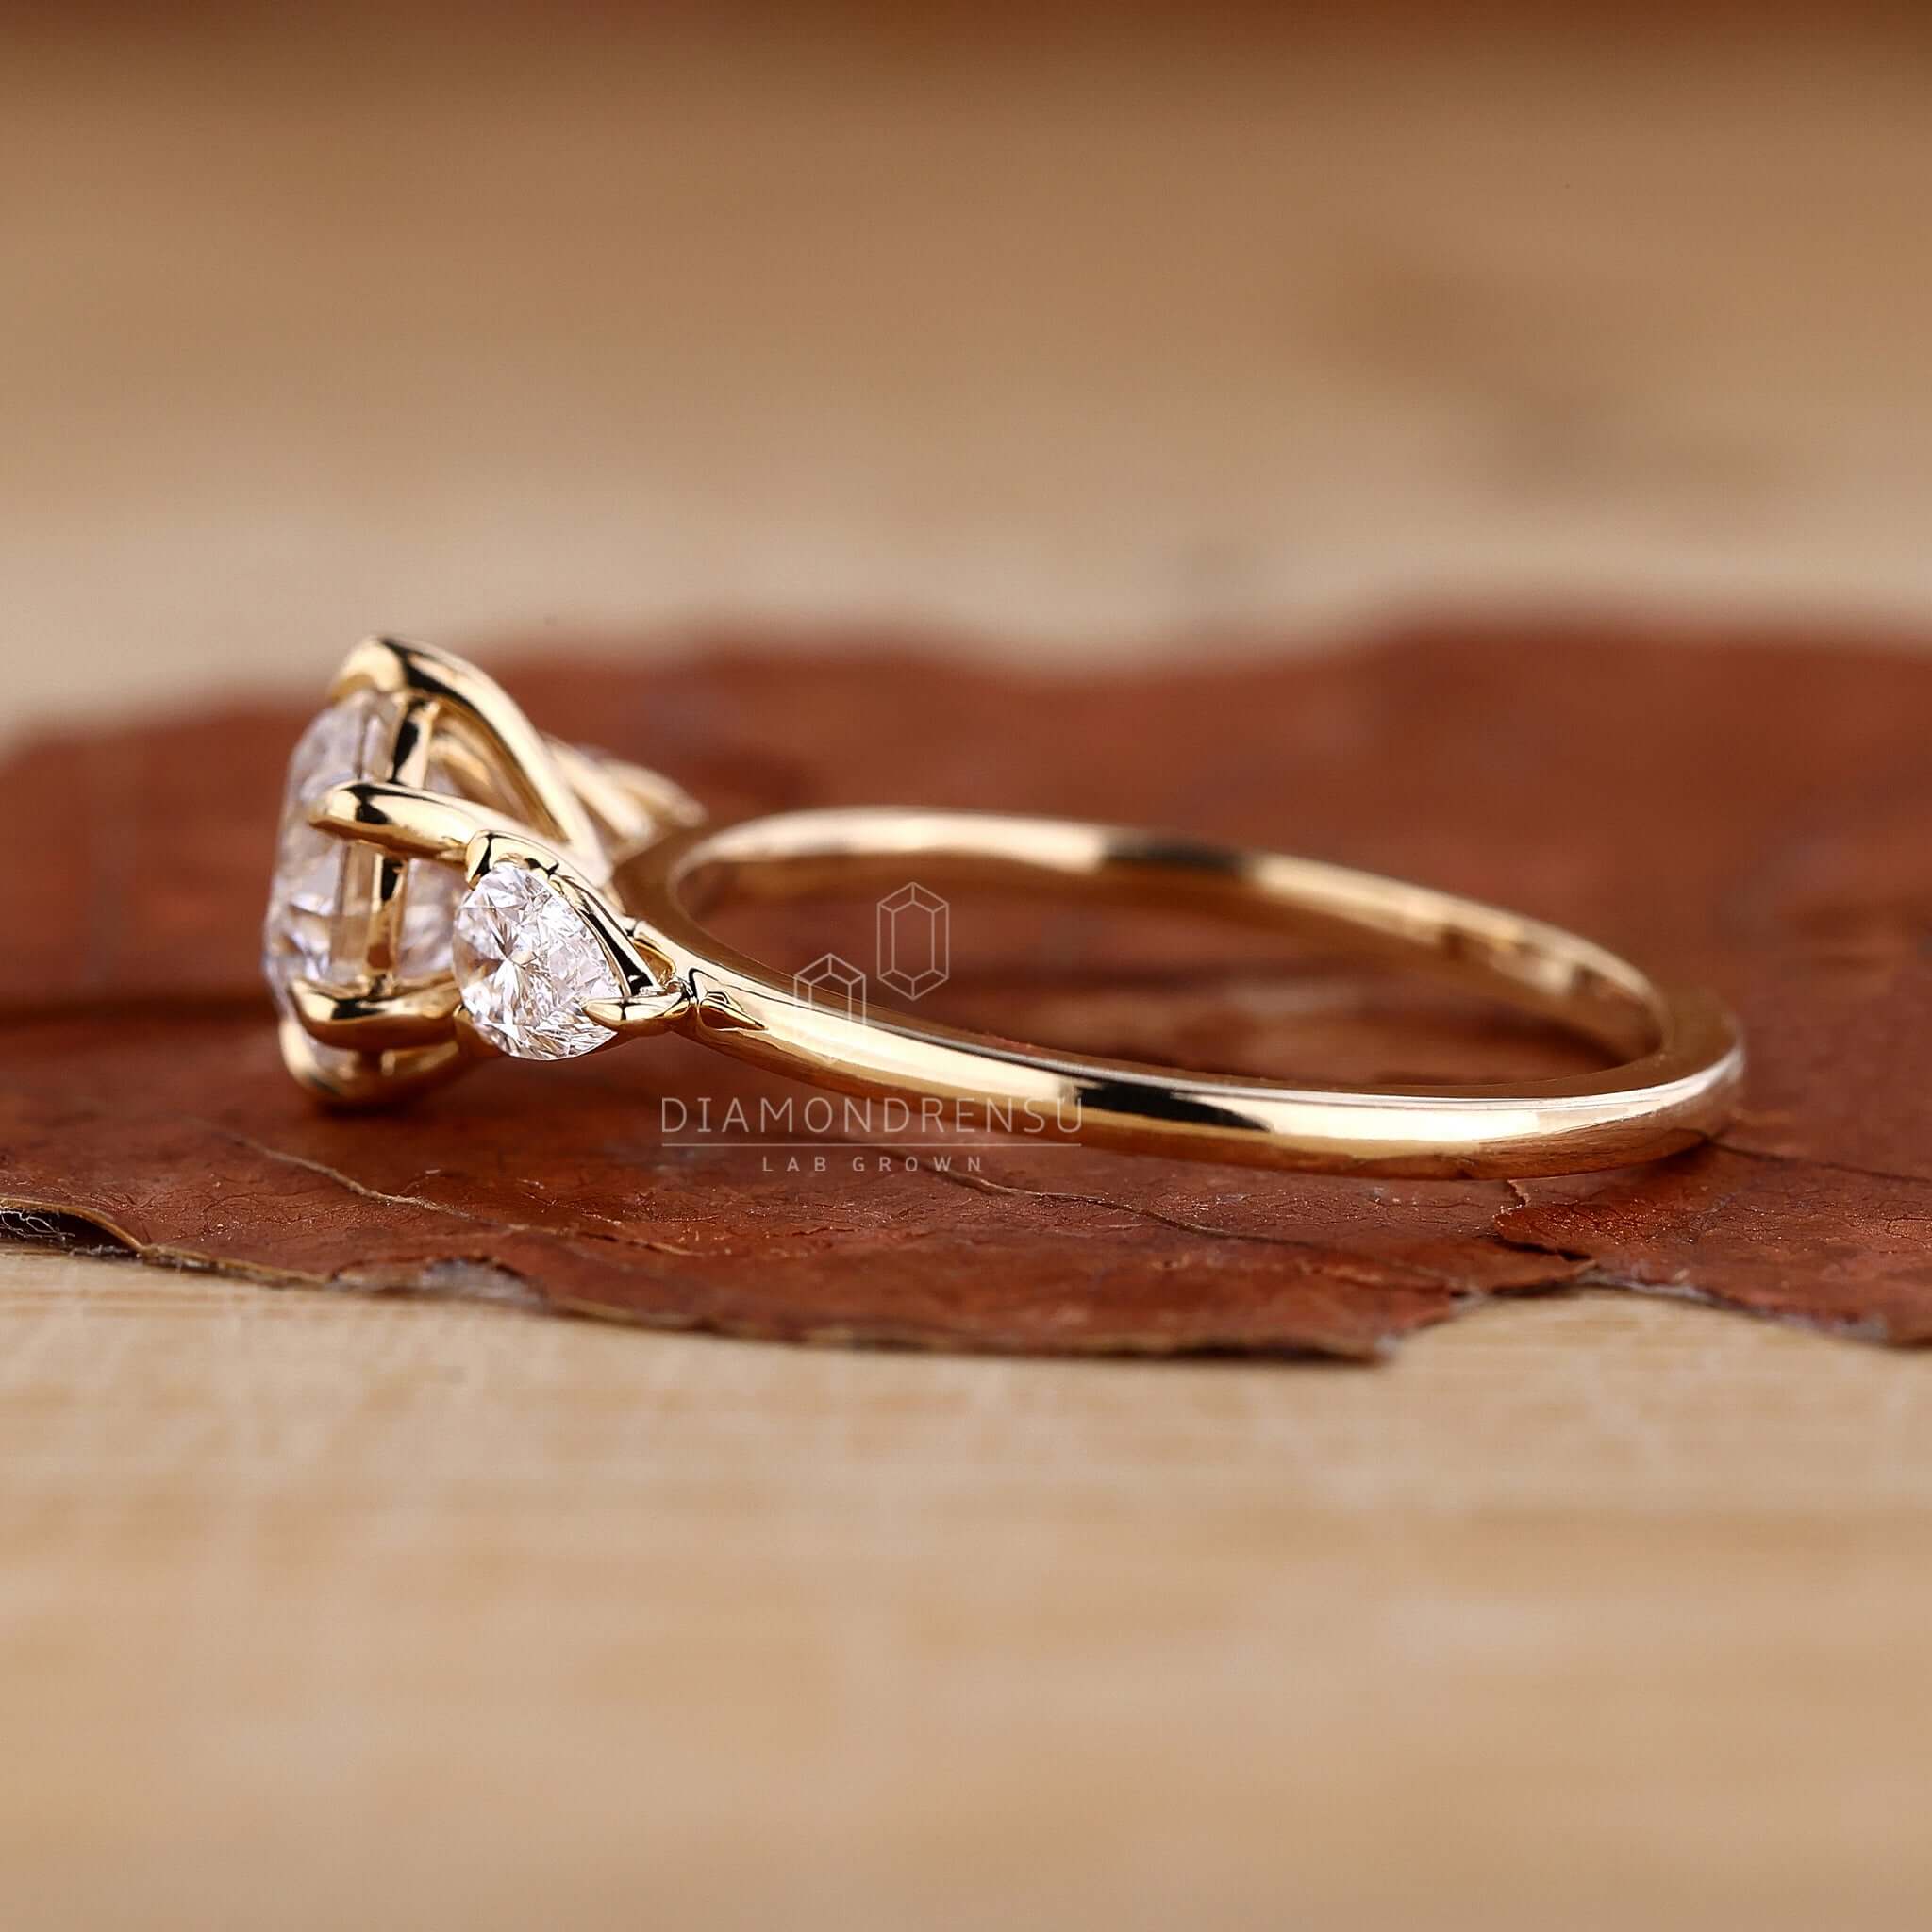 Classic three stone diamond ring in yellow gold, reflecting timeless beauty and sophistication.